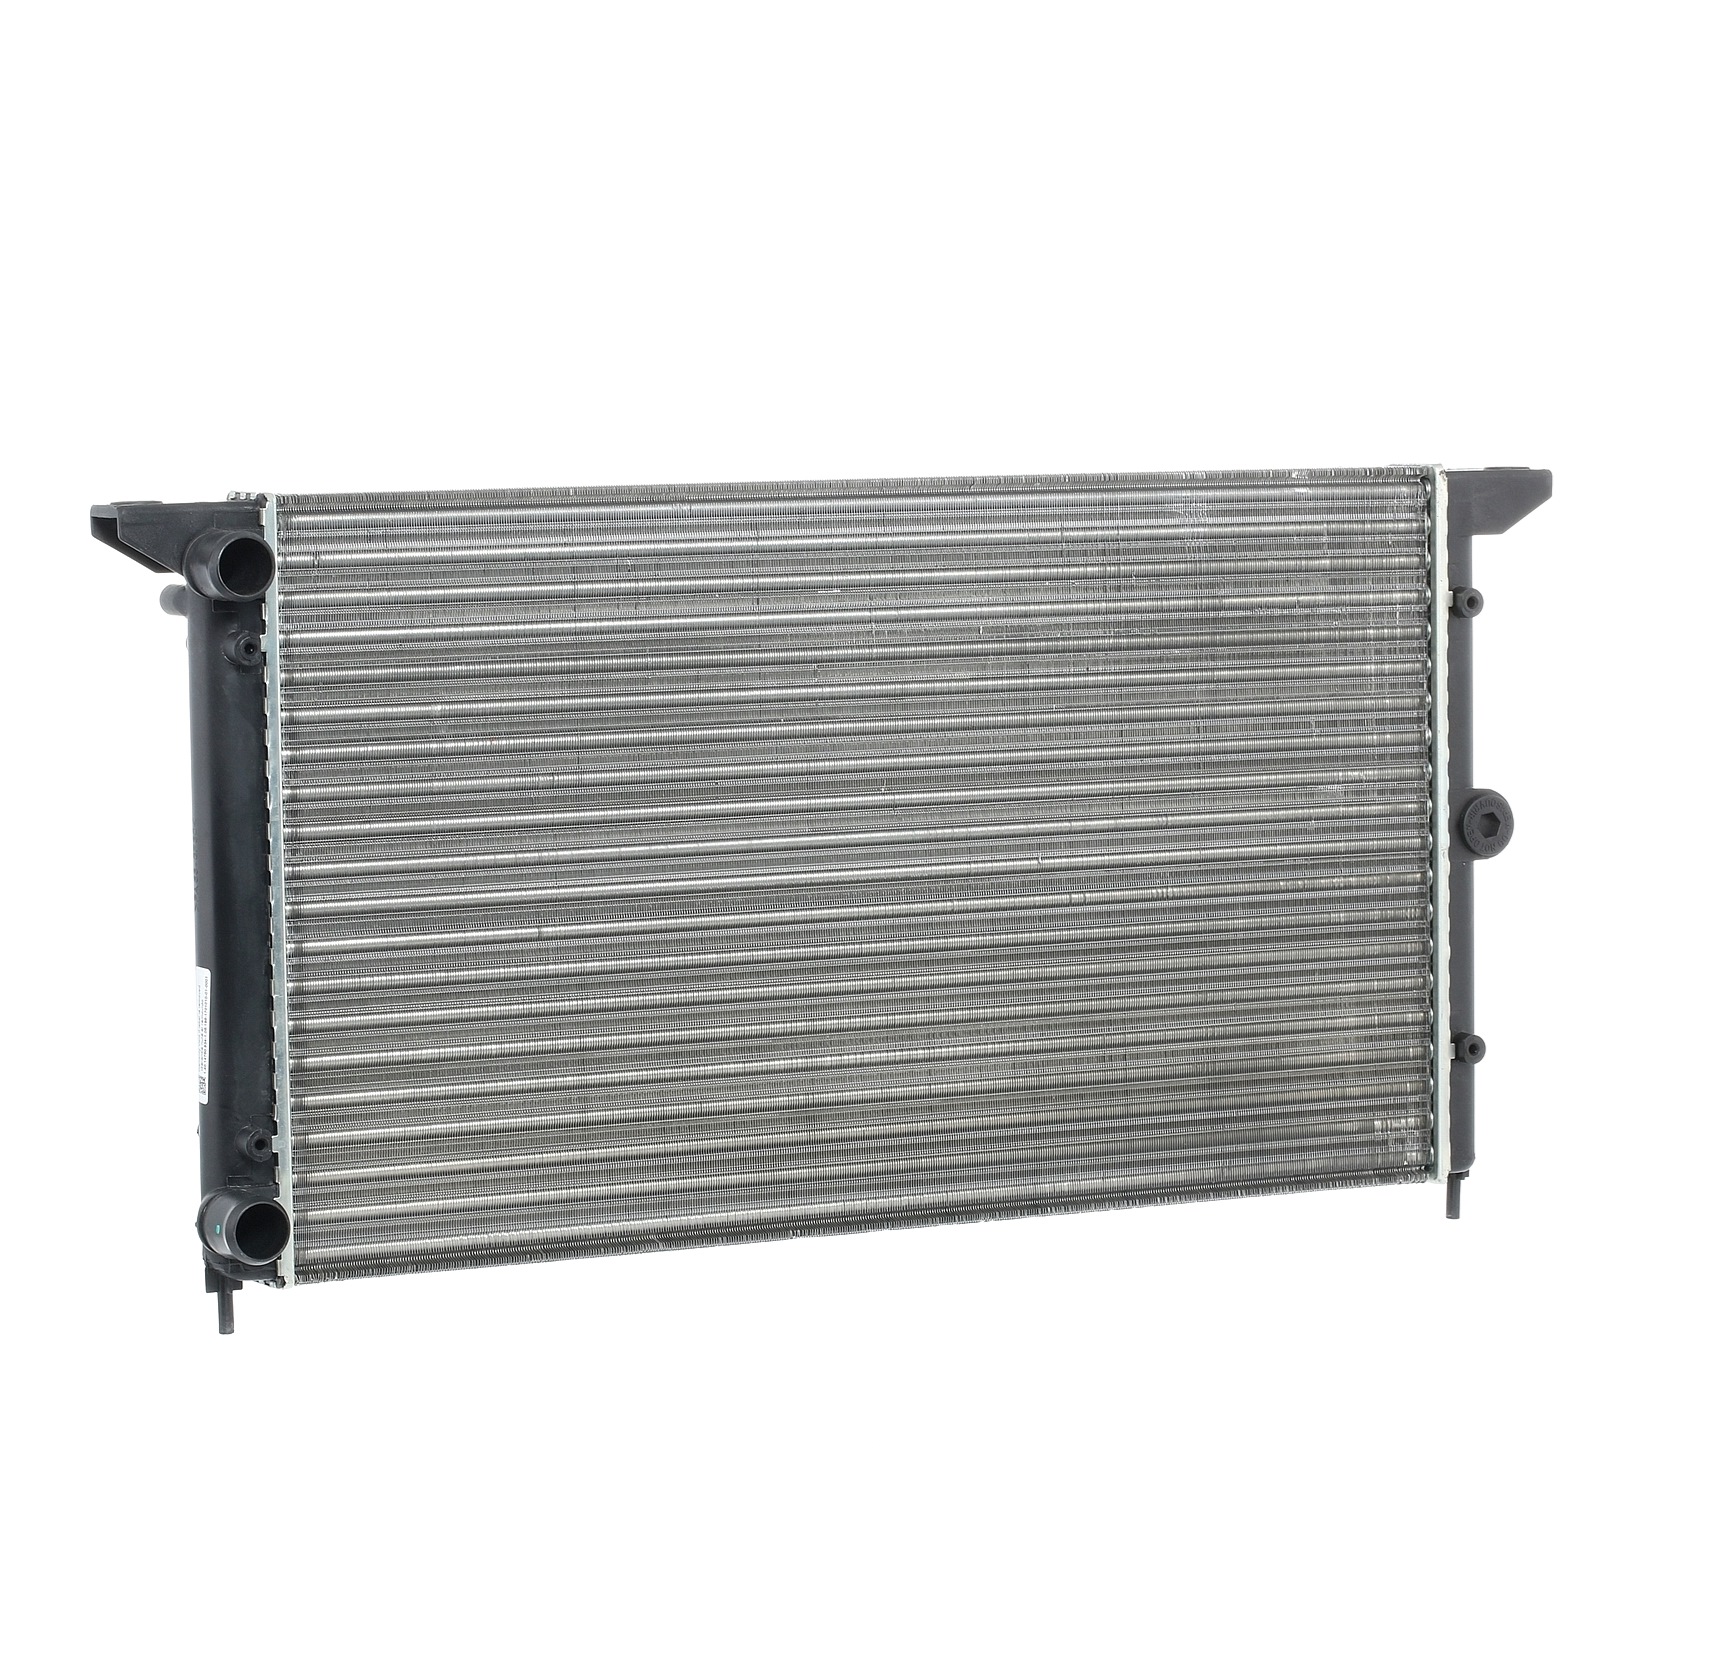 RIDEX 470R0180 Engine radiator Plastic, Aluminium, 645 x 378 x 34 mm, without frame, Mechanically jointed cooling fins